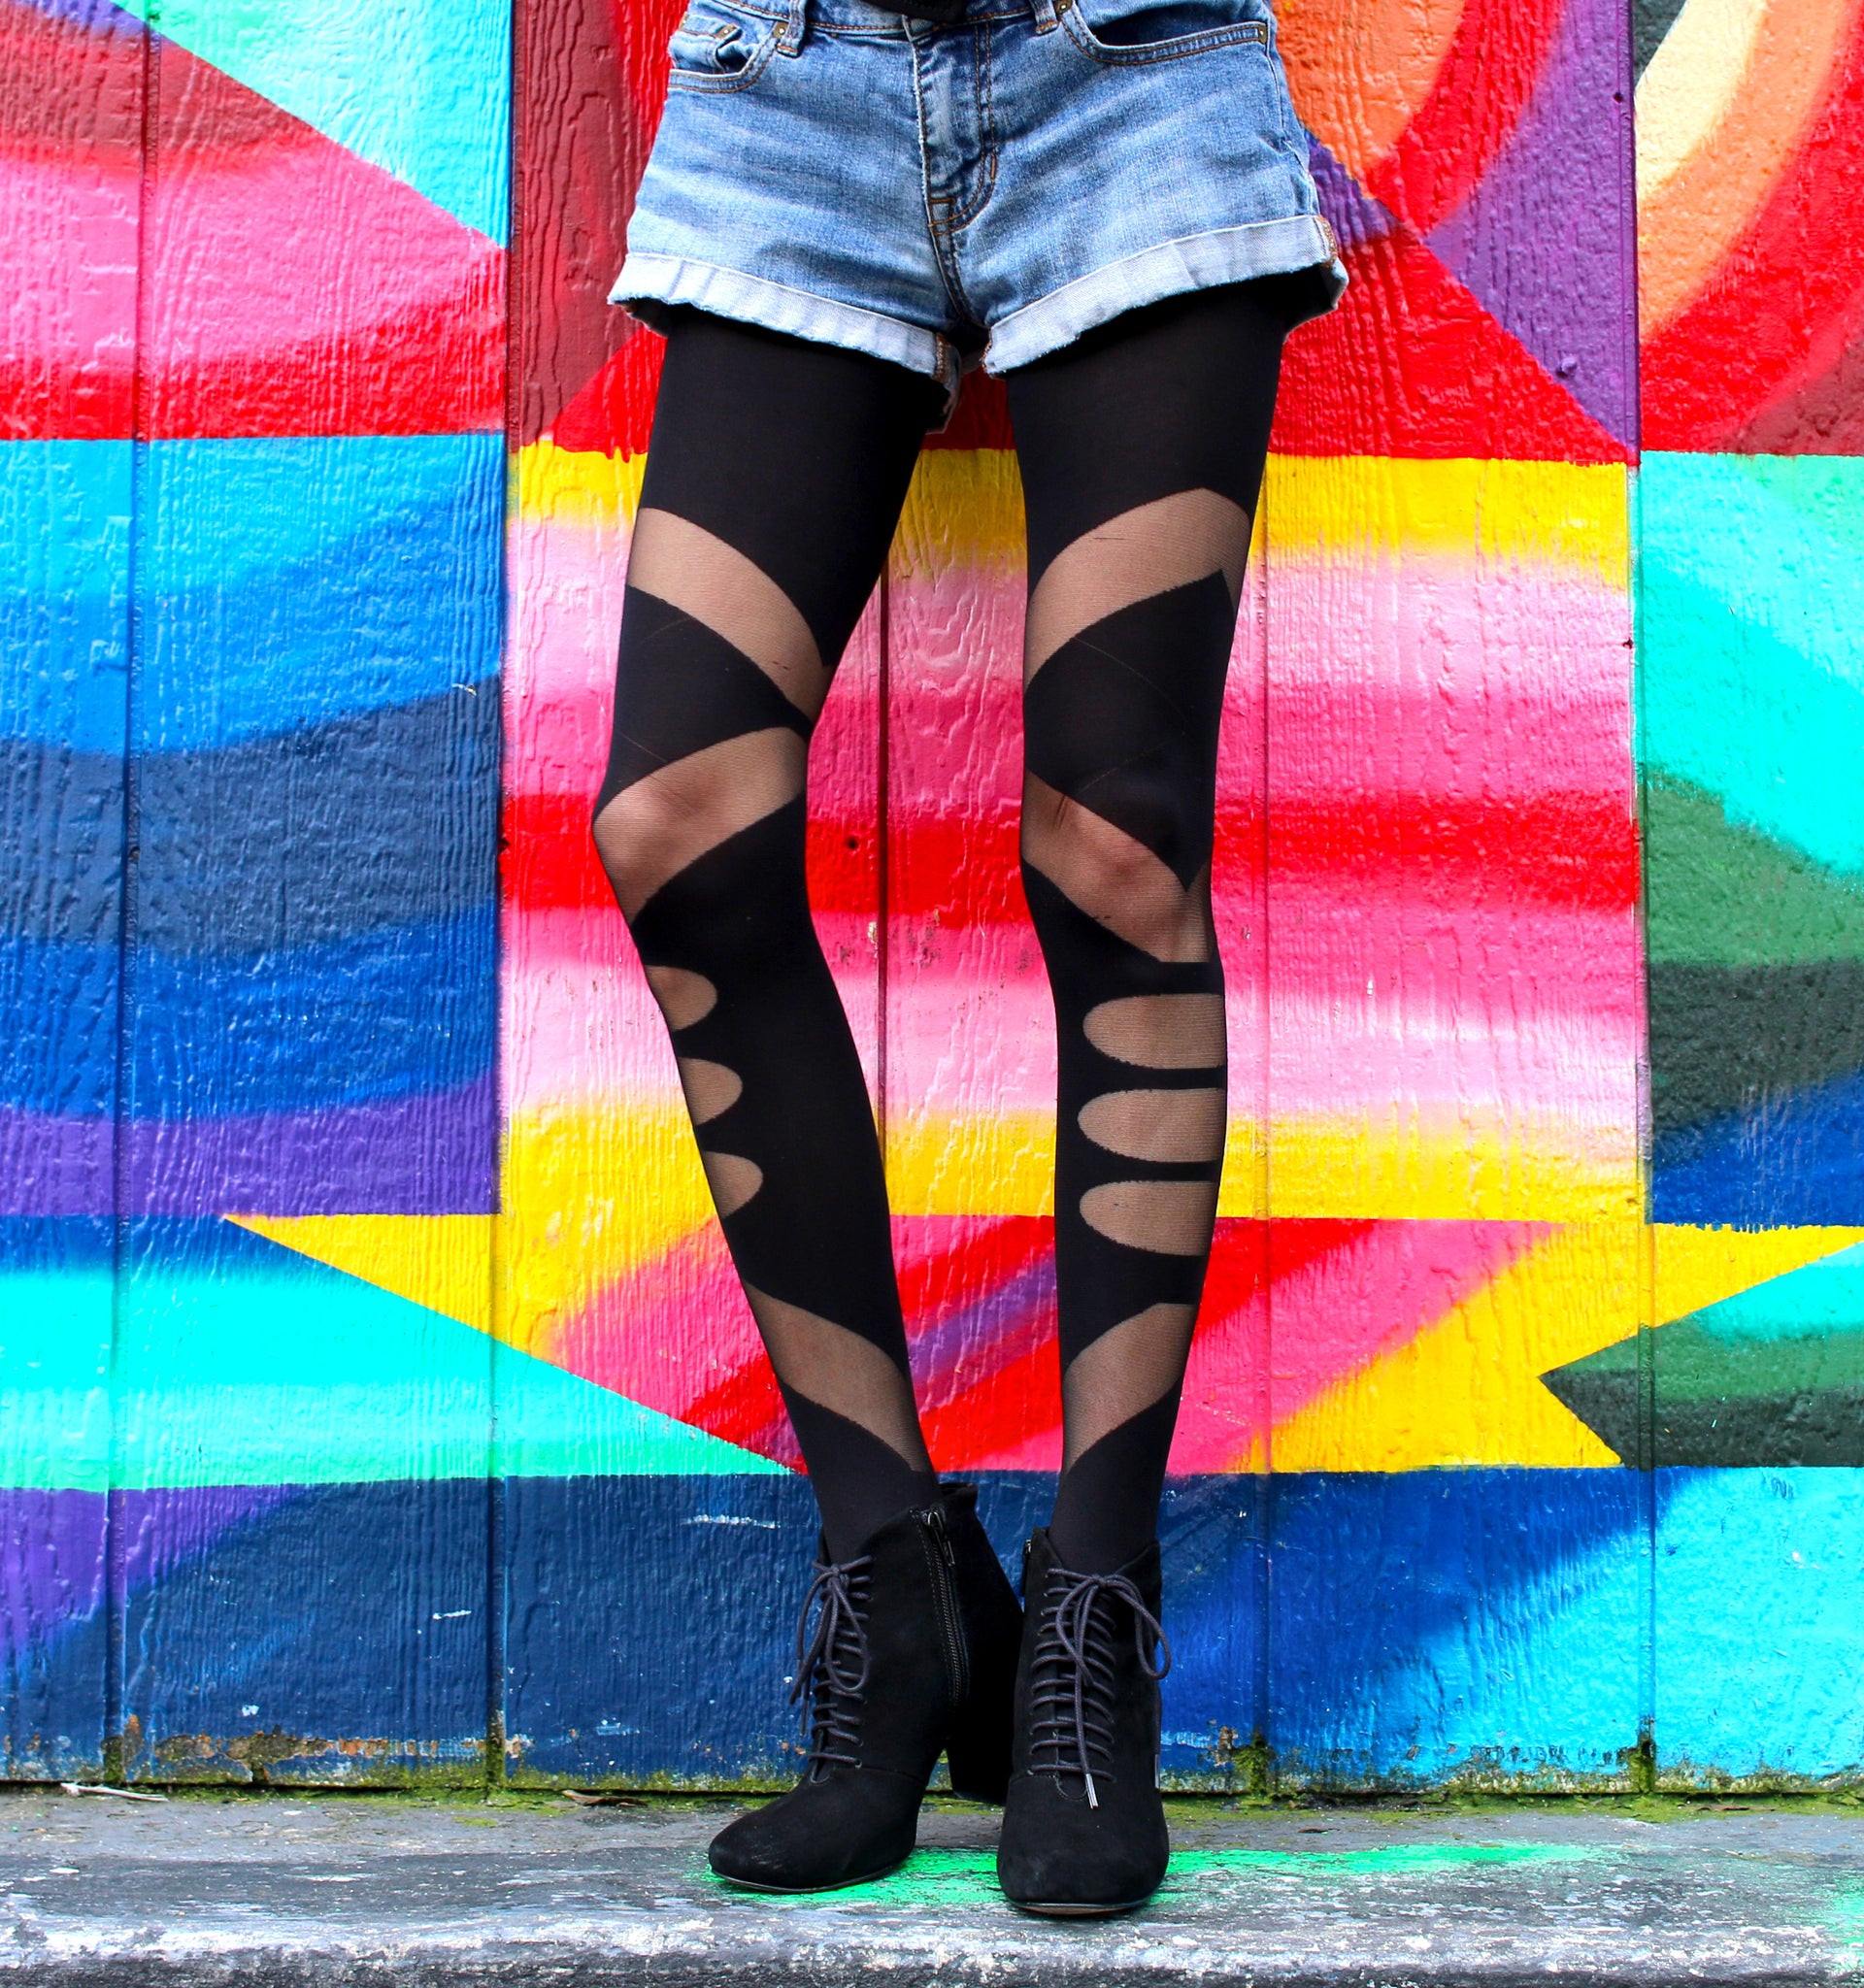 Cyberpunk Apocalyptic Tights – Millennials In Motion